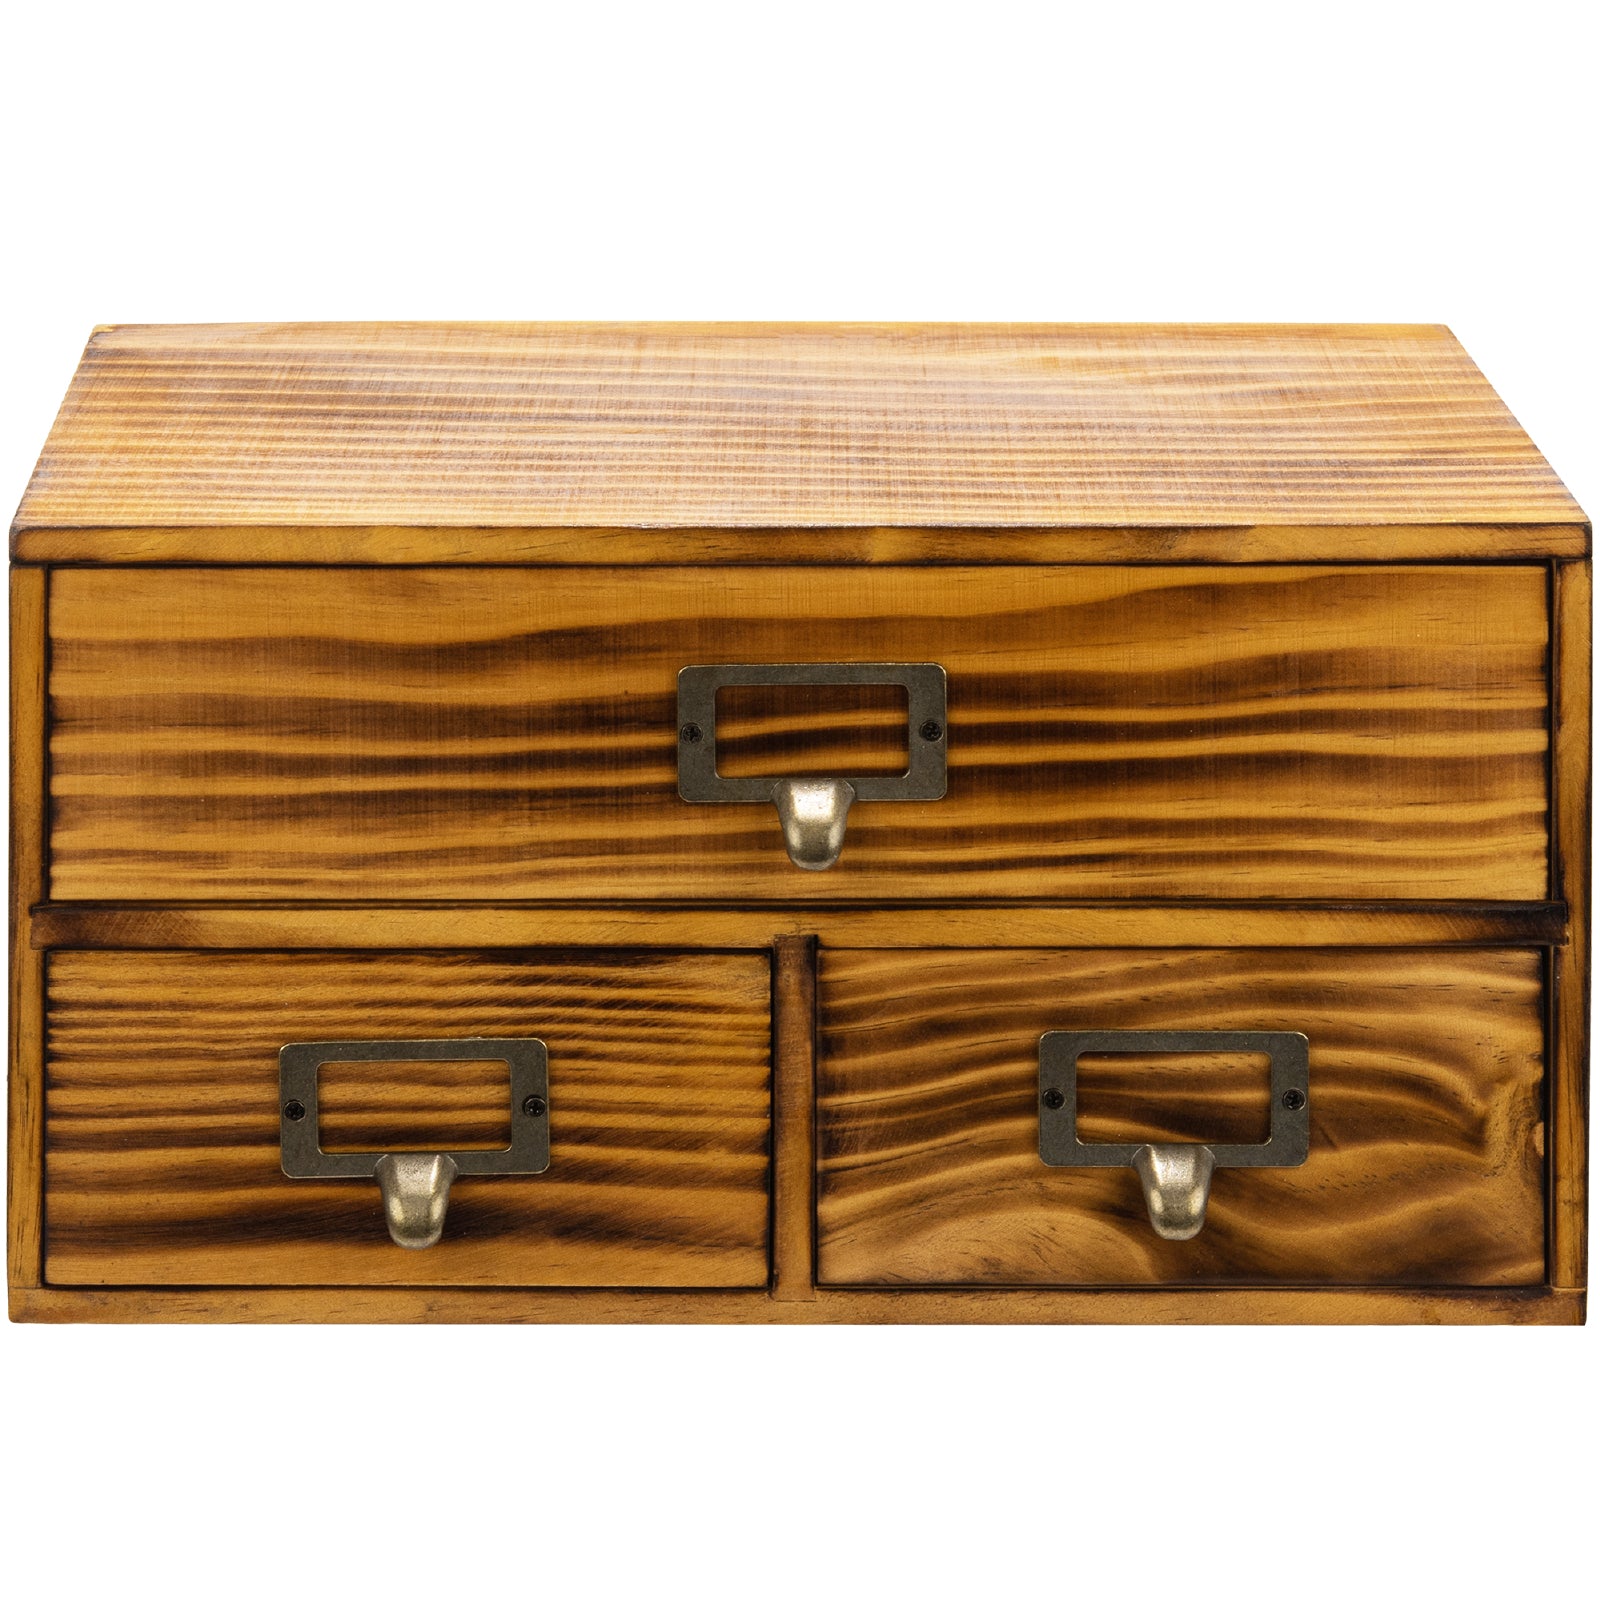 Load image into Gallery viewer, 3-Drawer Charred Ebony Wood Desktop Cabinet - Classic Brown Desktop Chest Drawer Unit